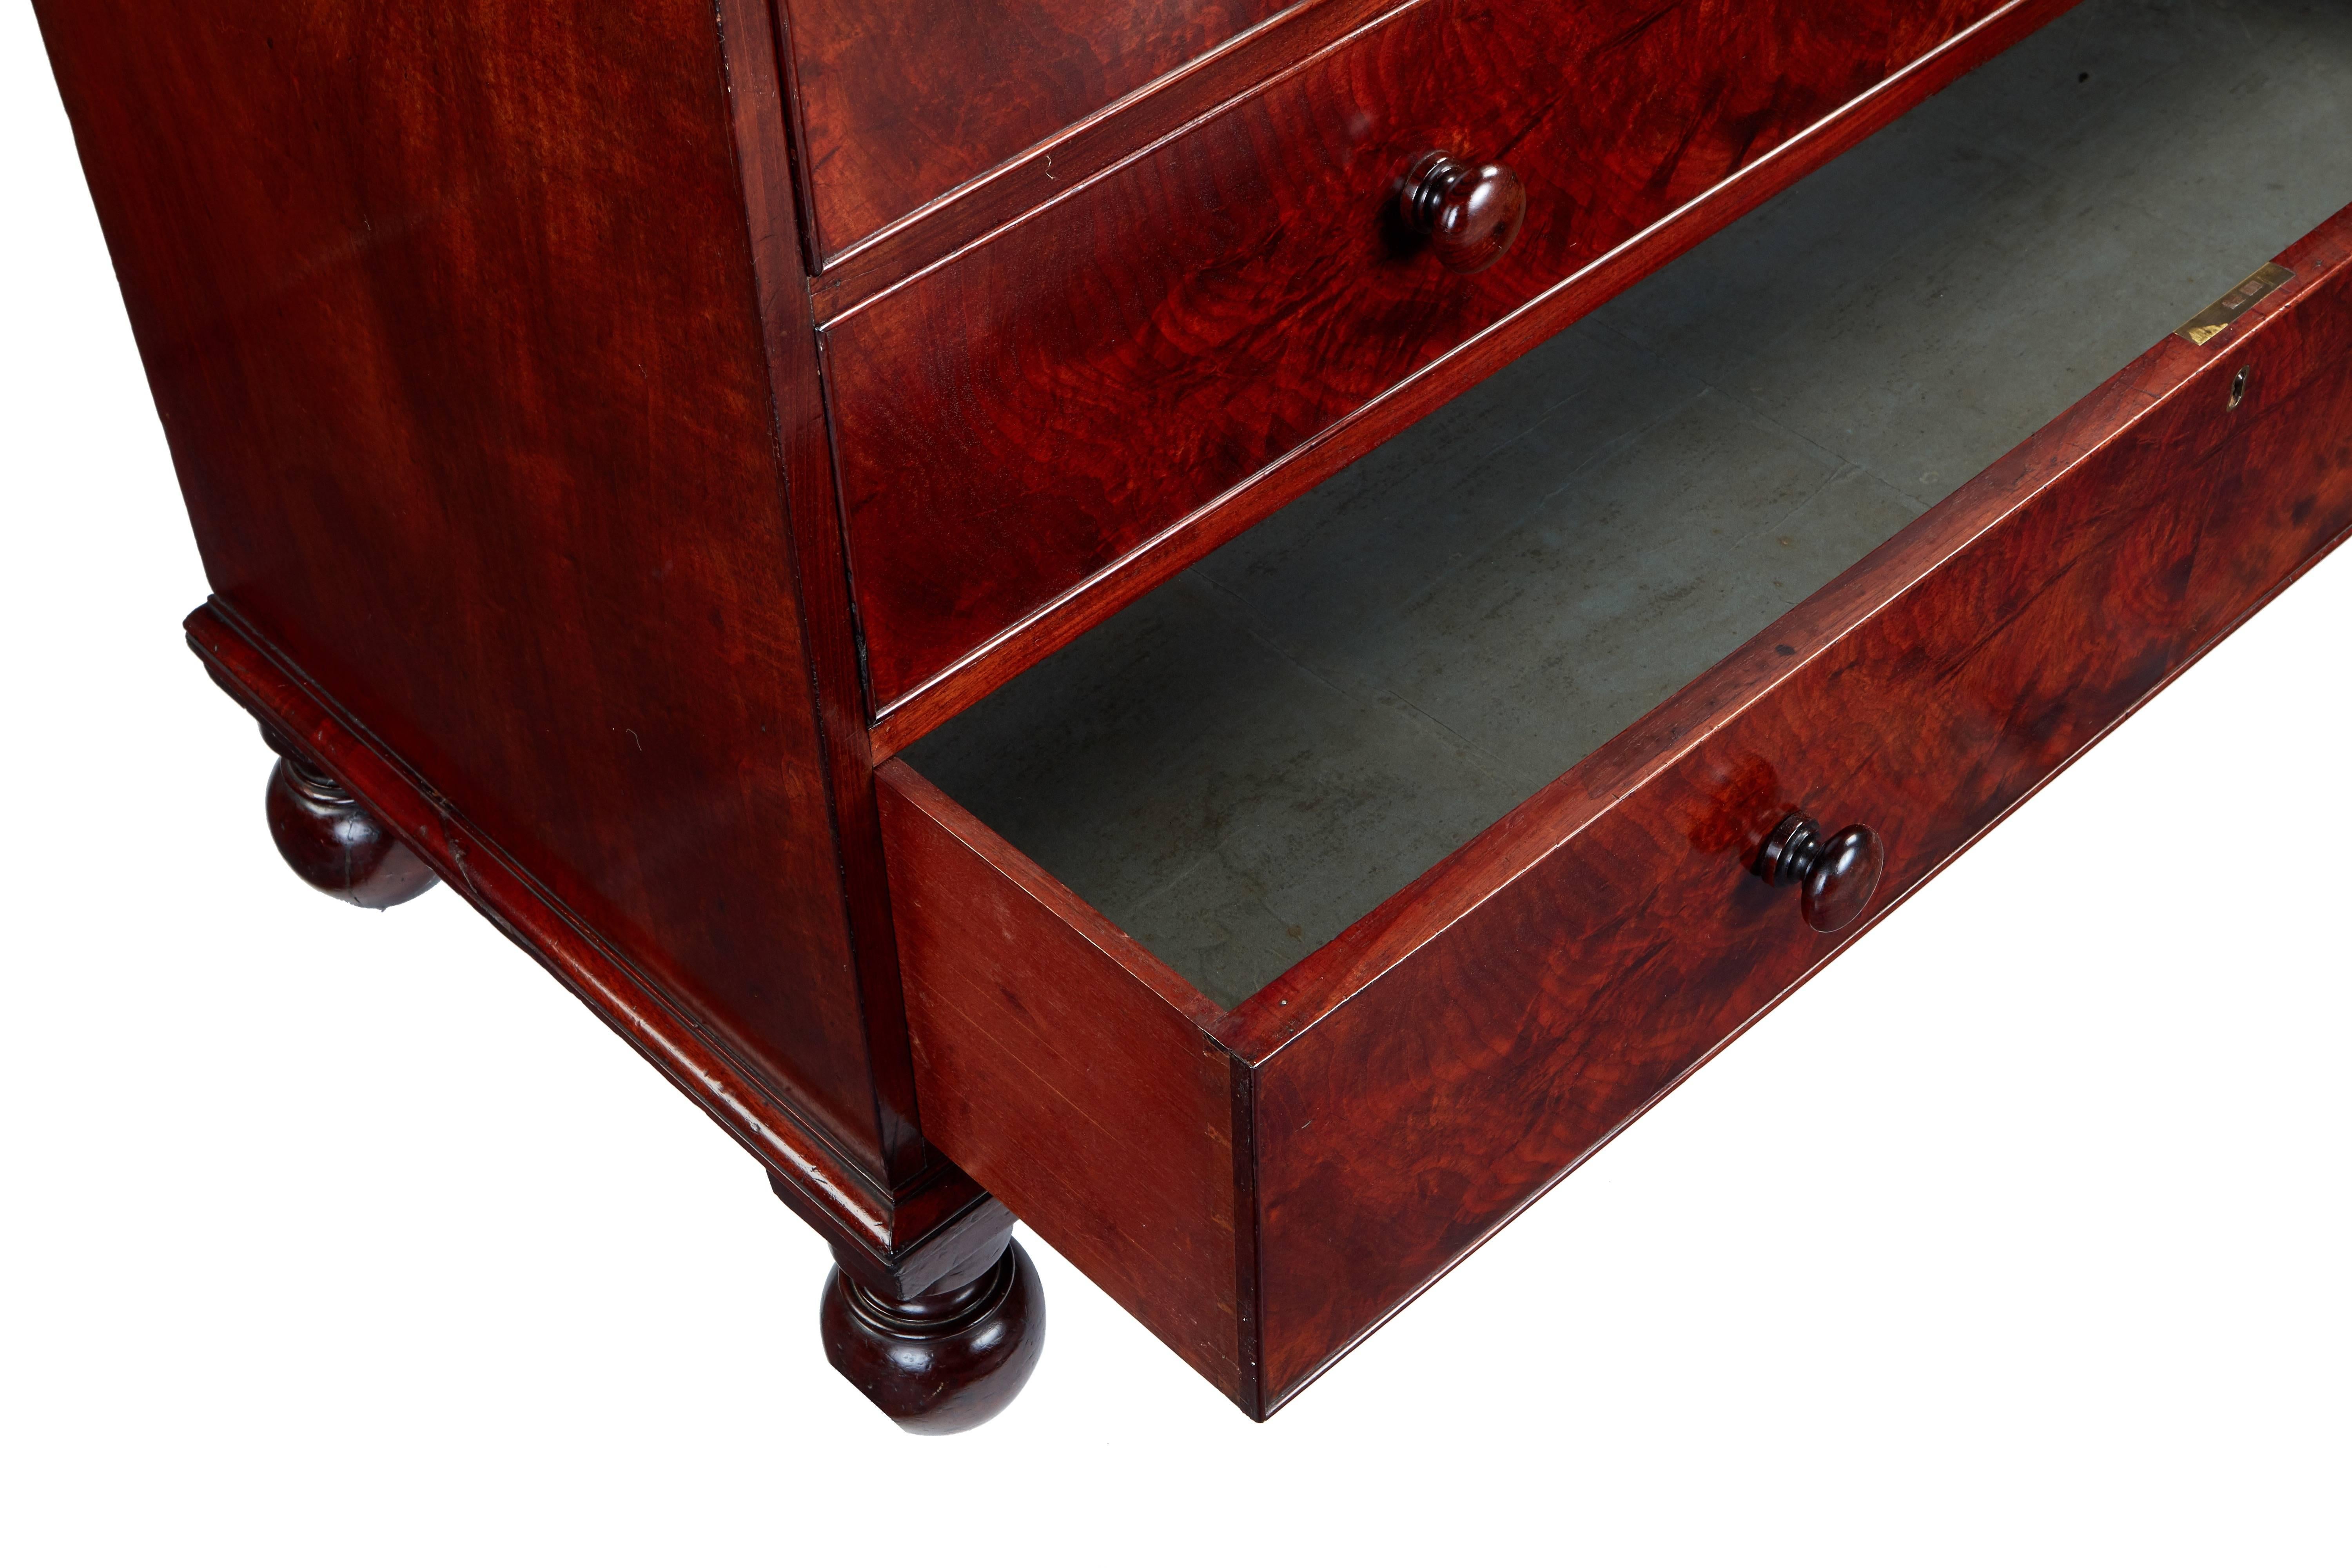 Turned George IV Mahogany Chest Attributed to Gillows, circa 1850